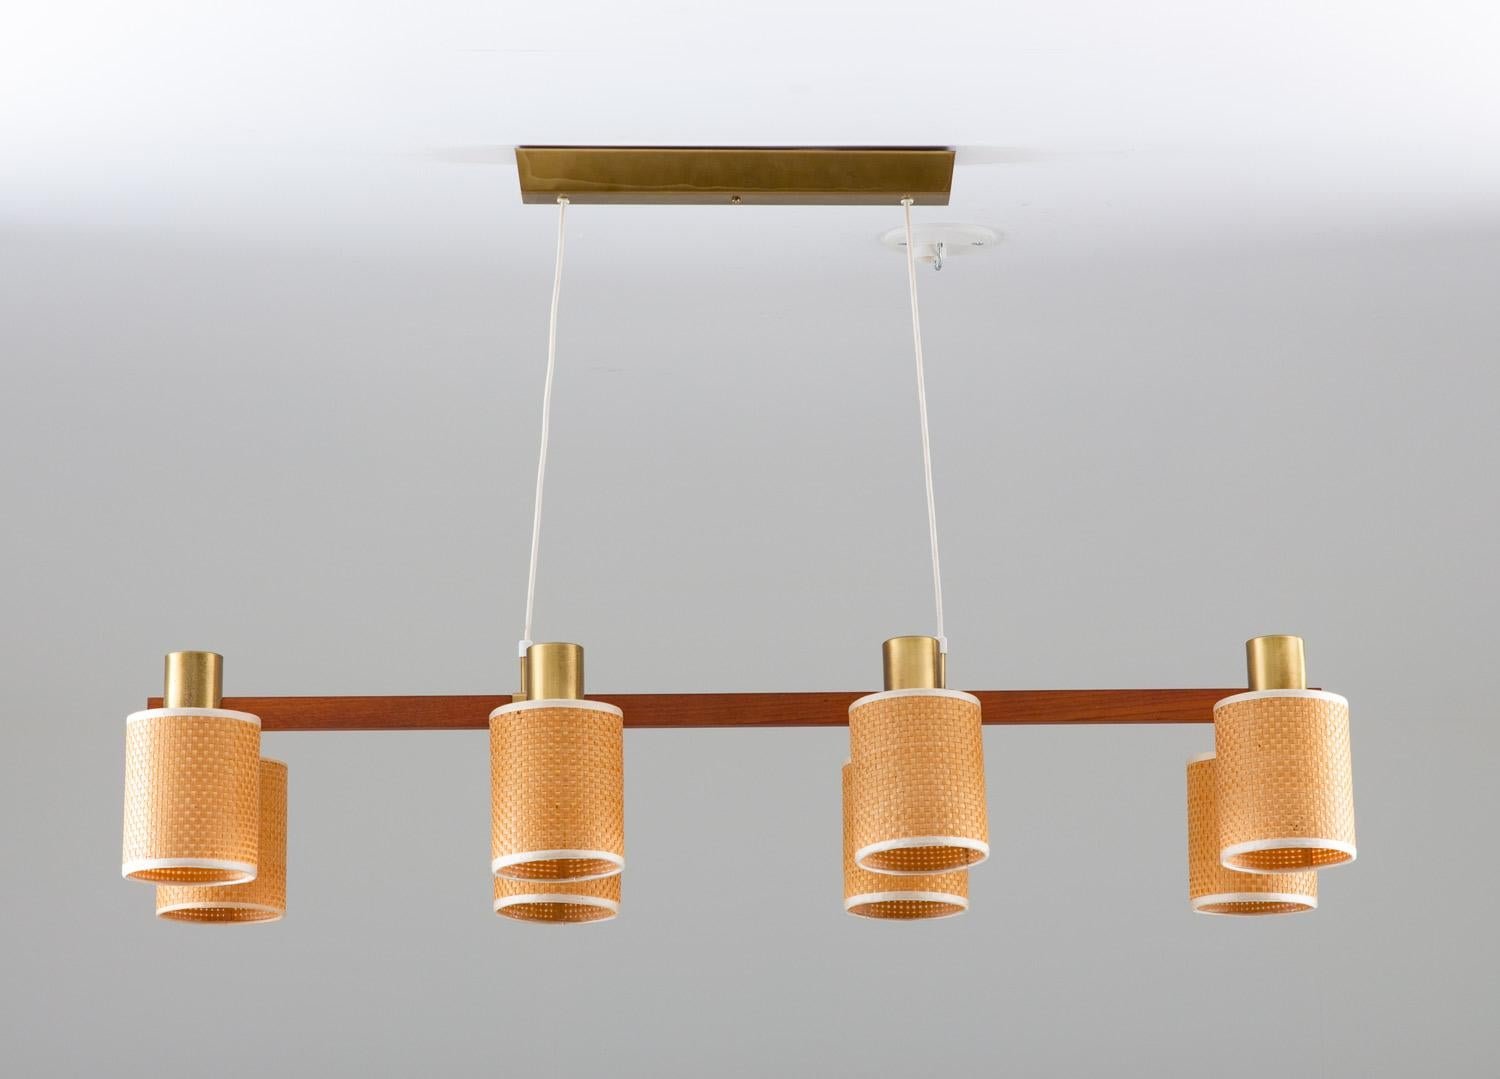 Very rare midcentury ceiling lamp by Hans Bergström for Ateljé Lyktan, Sweden.
This lamp consists of a teak frame with four arms in brass, each holding two light sources. The original shades are made of rattan, giving a soft, ambient light.